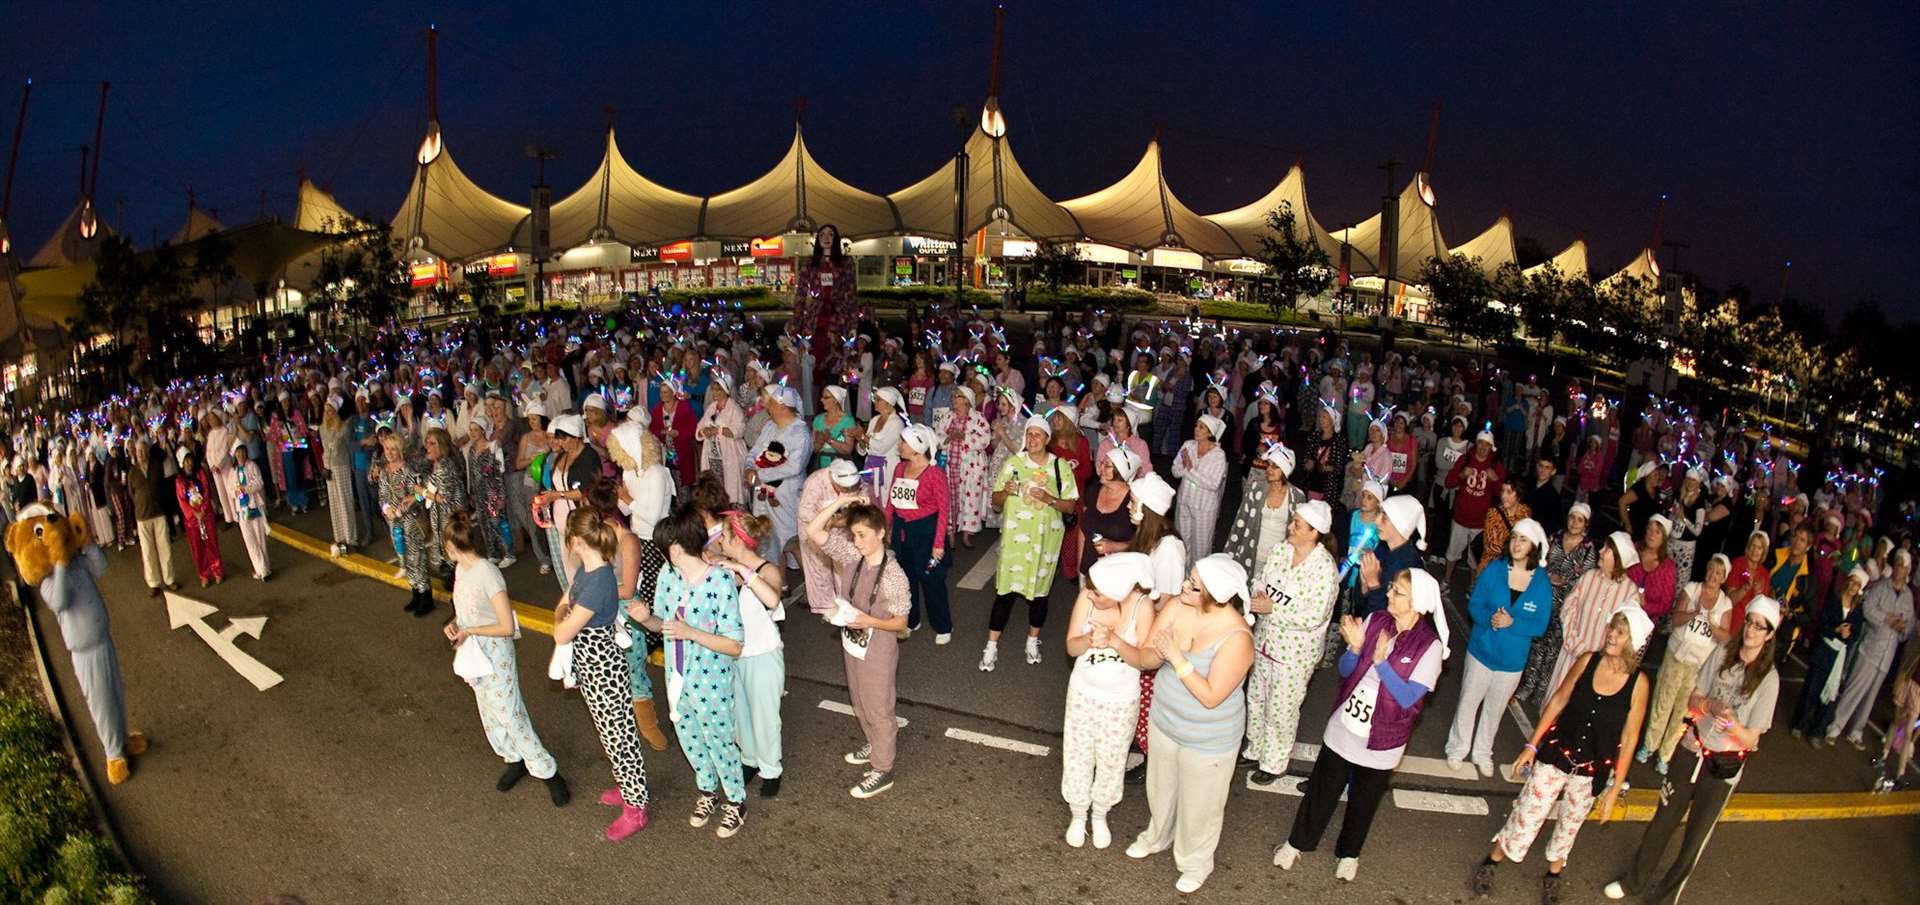 Pilgrims Hospice Pyjama Walk participants limber up for the event at the Ashford Designer Outlet in 2012